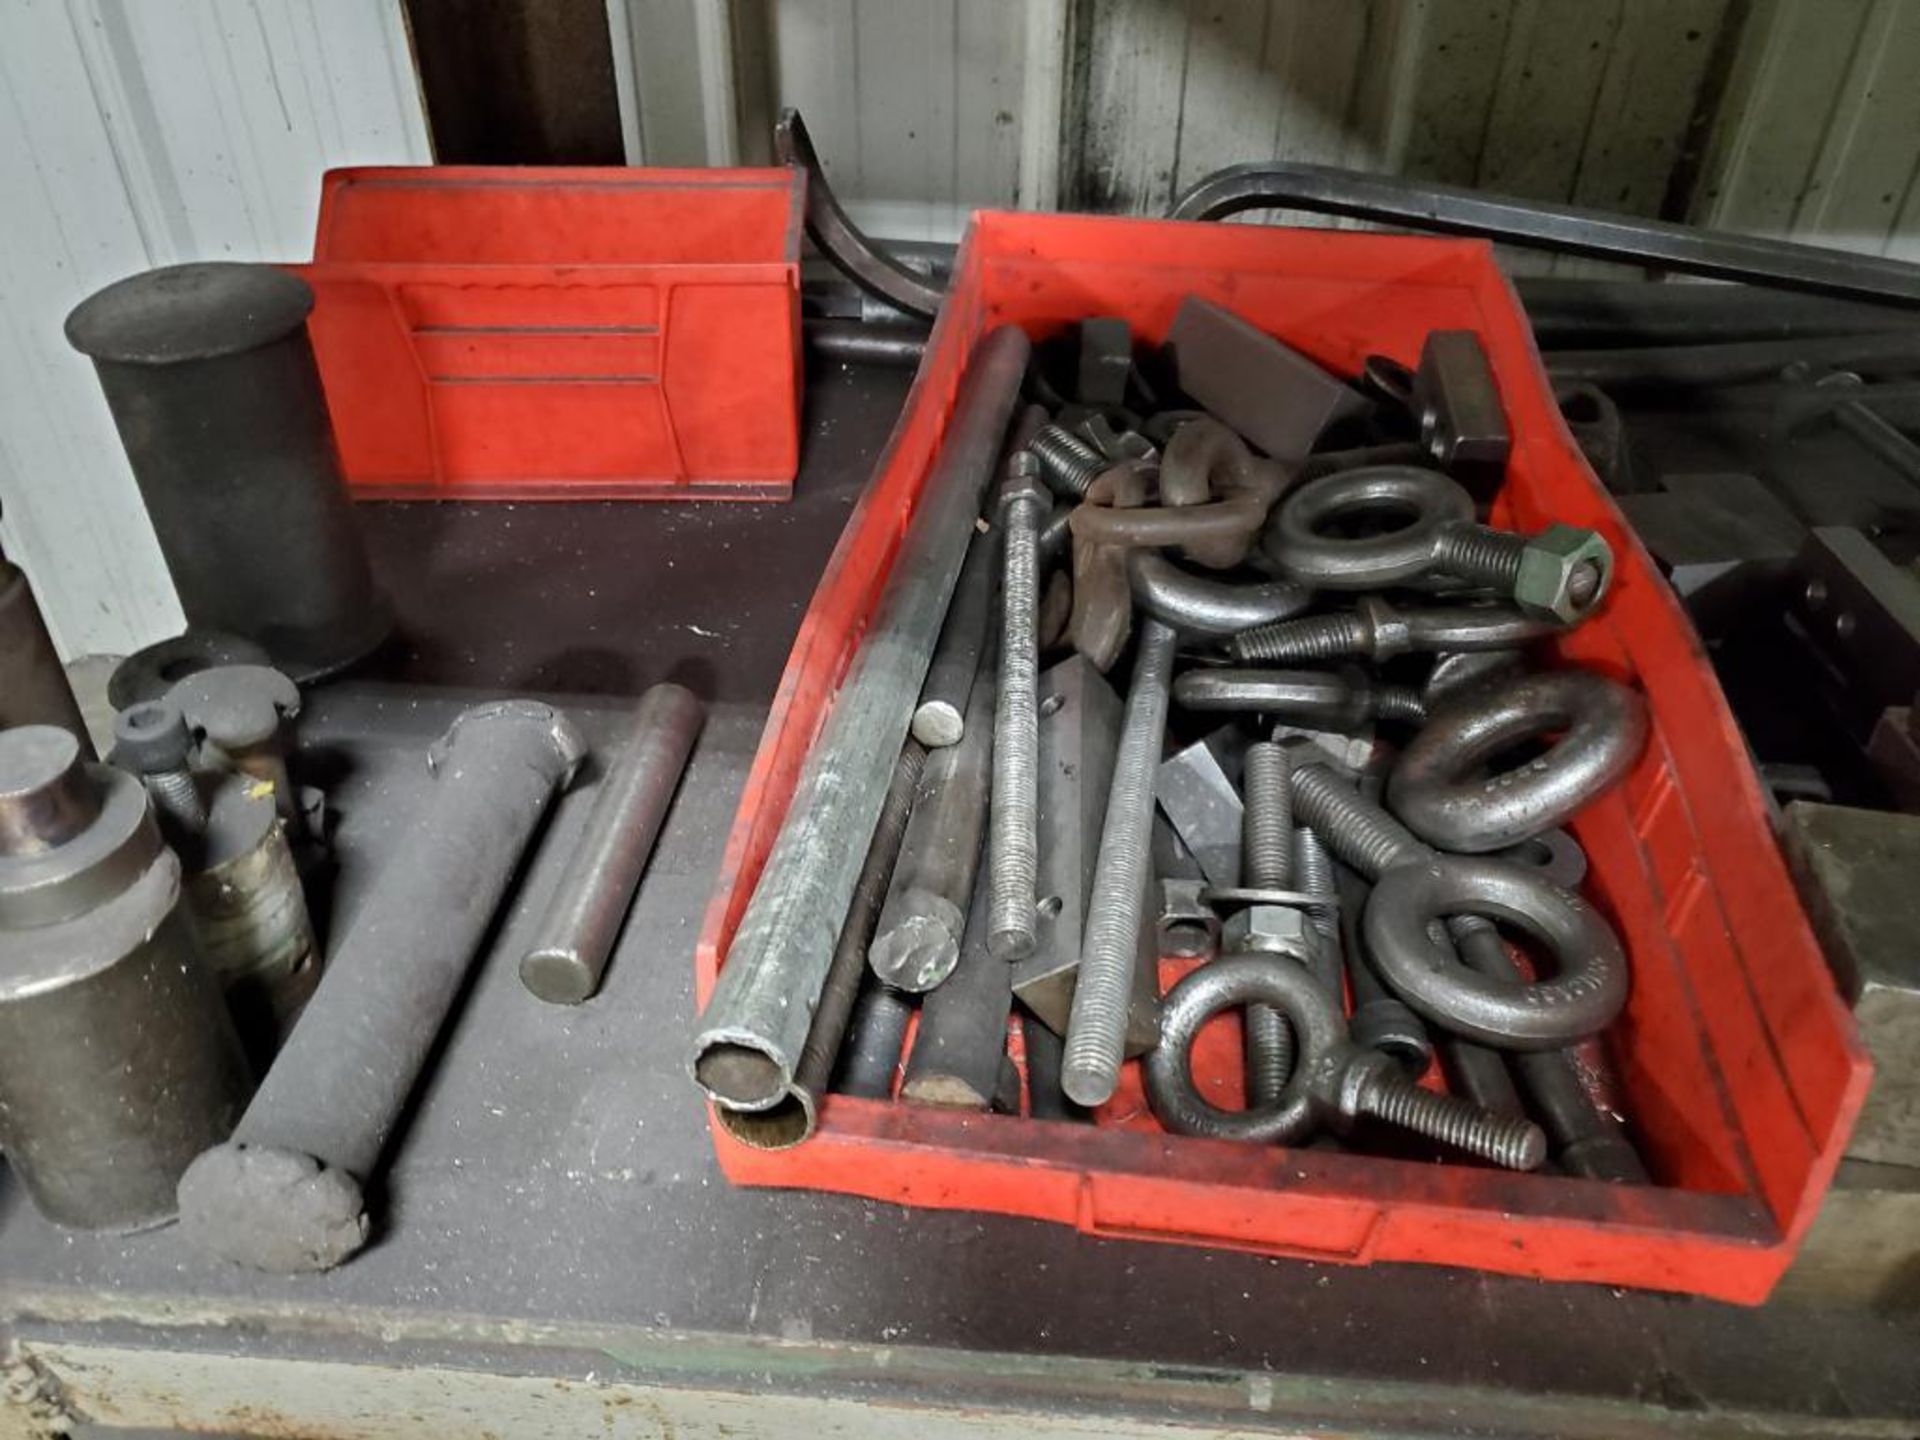 (2) STEEL TABLES, W/ BENCH VISE, ANGLE BLOCKS, EYE BOLTS, PARTS VISES, PERISHABLE TOOLING, & MORE - Image 7 of 10